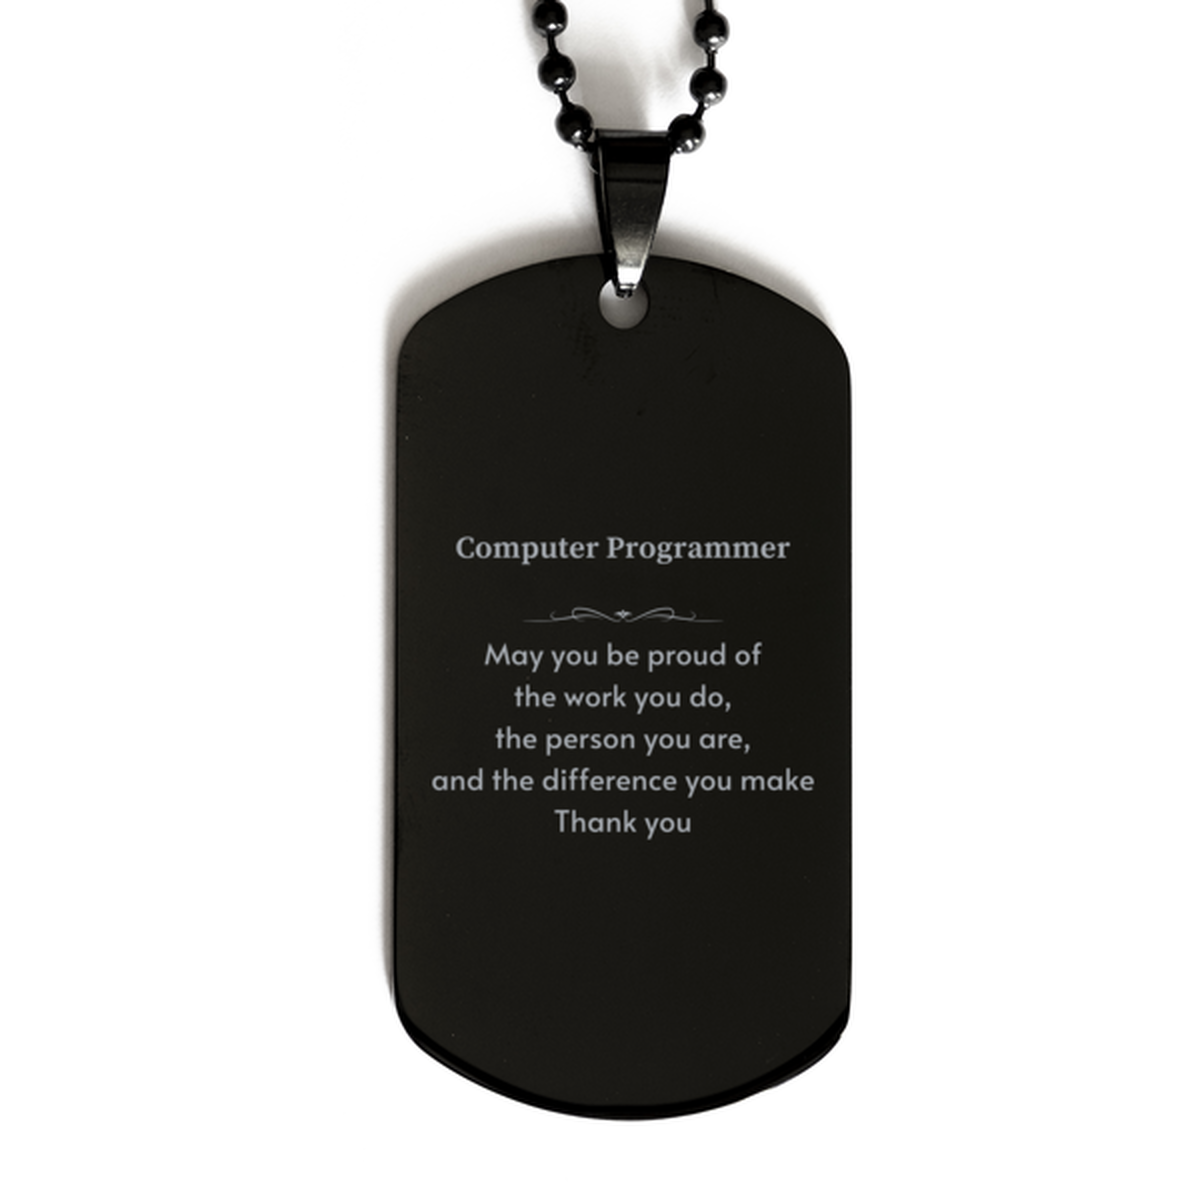 Heartwarming Black Dog Tag Retirement Coworkers Gifts for Computer Programmer, Computer Programmer May You be proud of the work you do, the person you are Gifts for Boss Men Women Friends